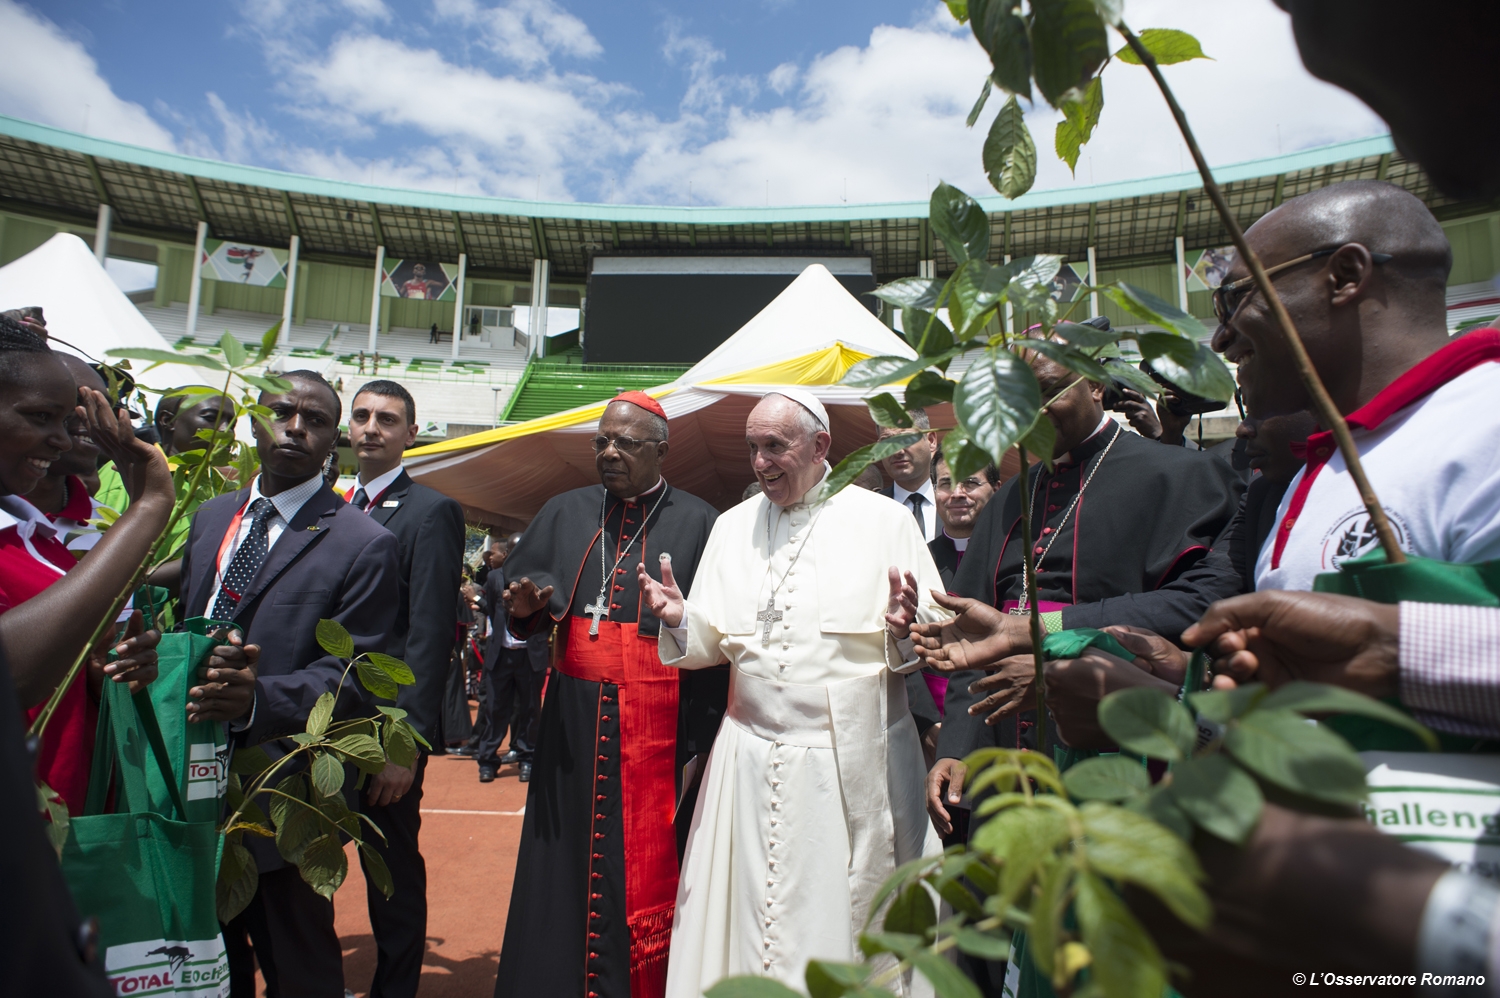 Pope Francis' meeting with the youth at the Kasarani stadium in Nairobi